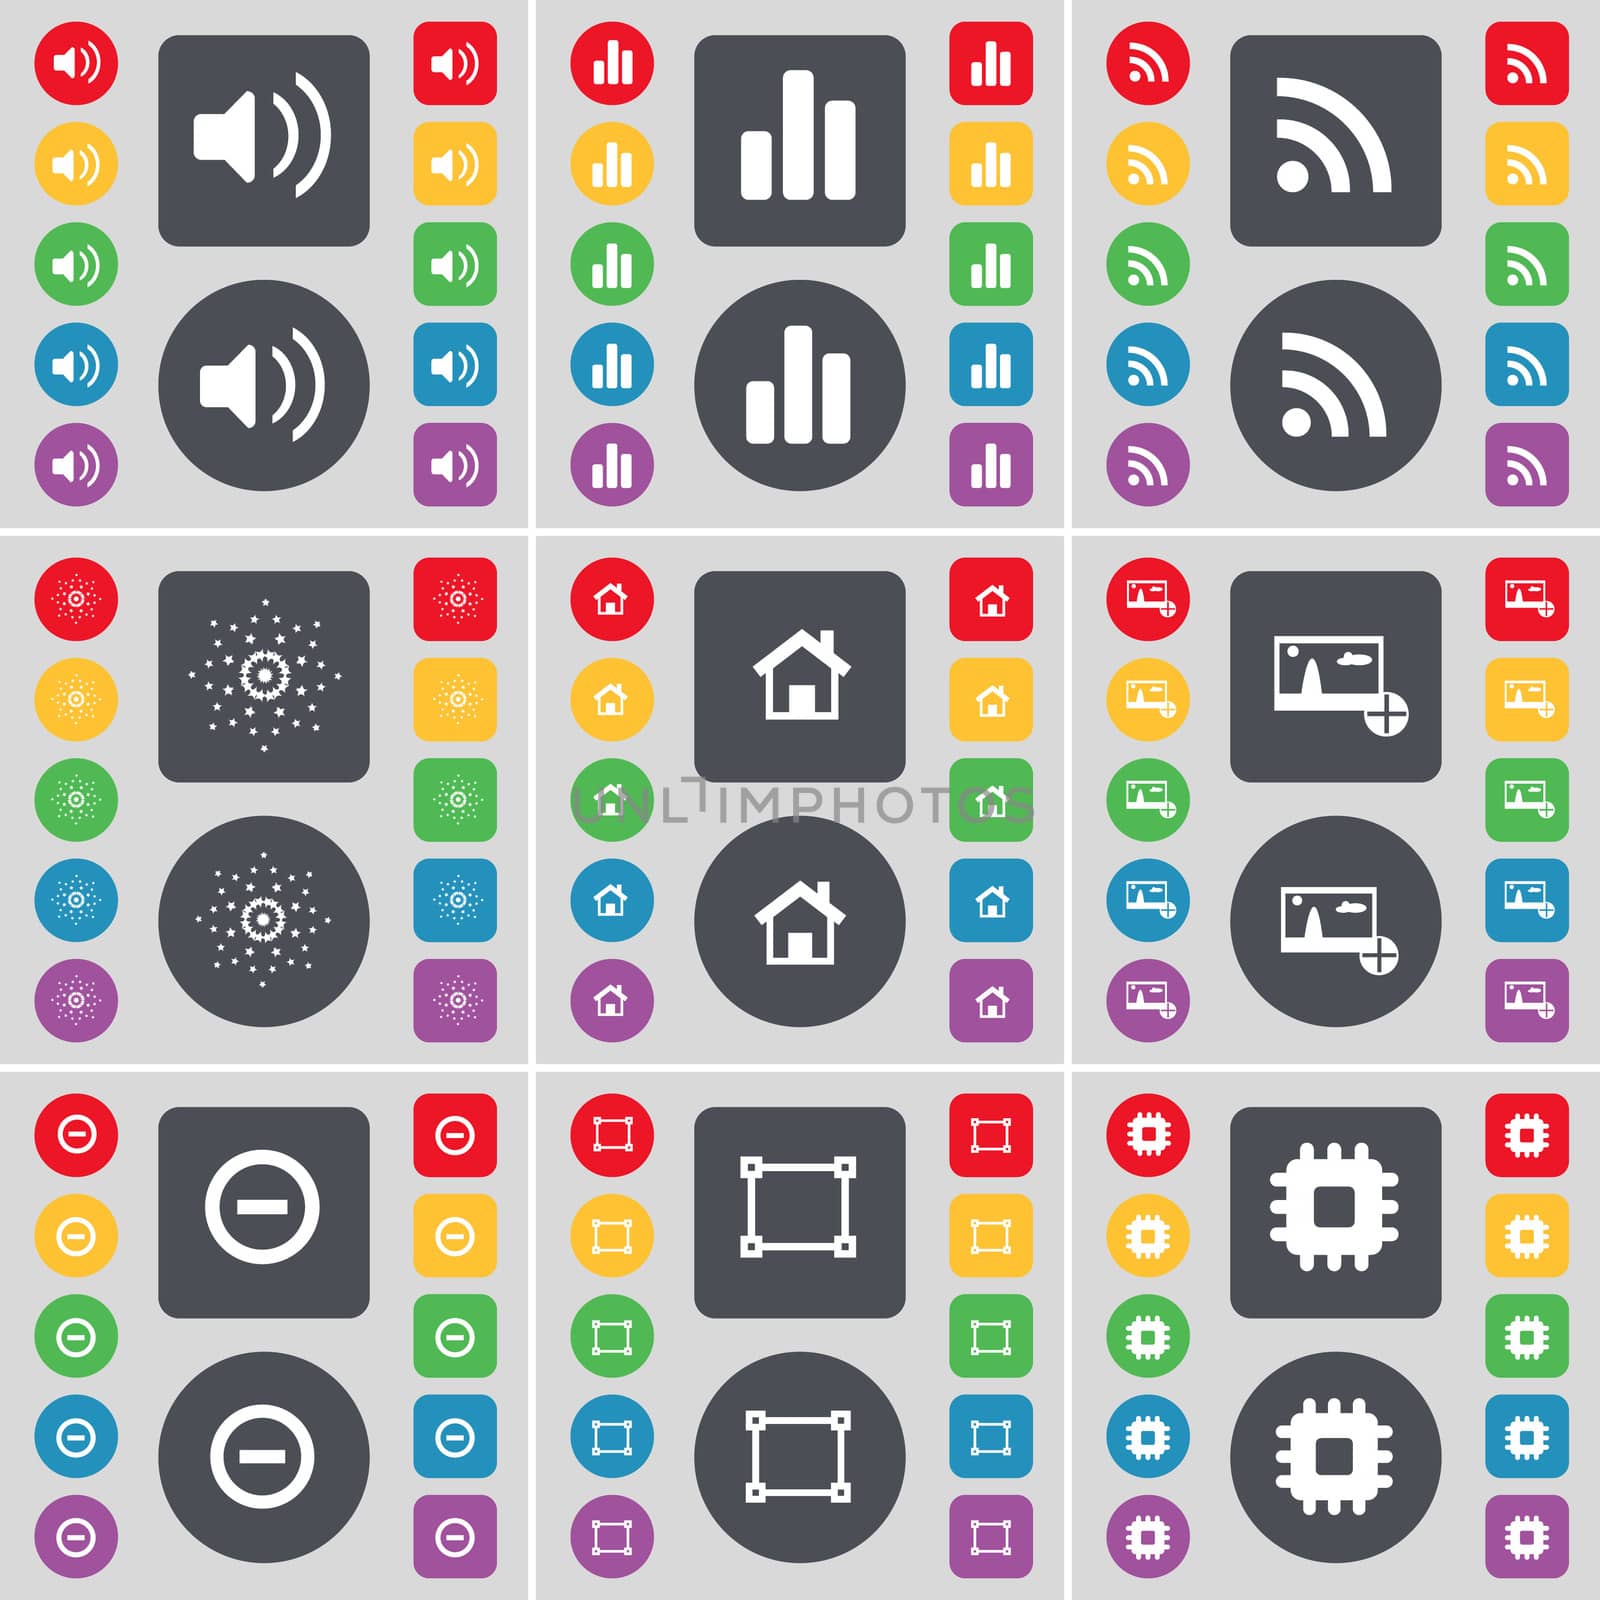 Sound, Diagram, RSS, Star, House, Picture, Minus, Frame, Processor icon symbol. A large set of flat, colored buttons for your design. illustration